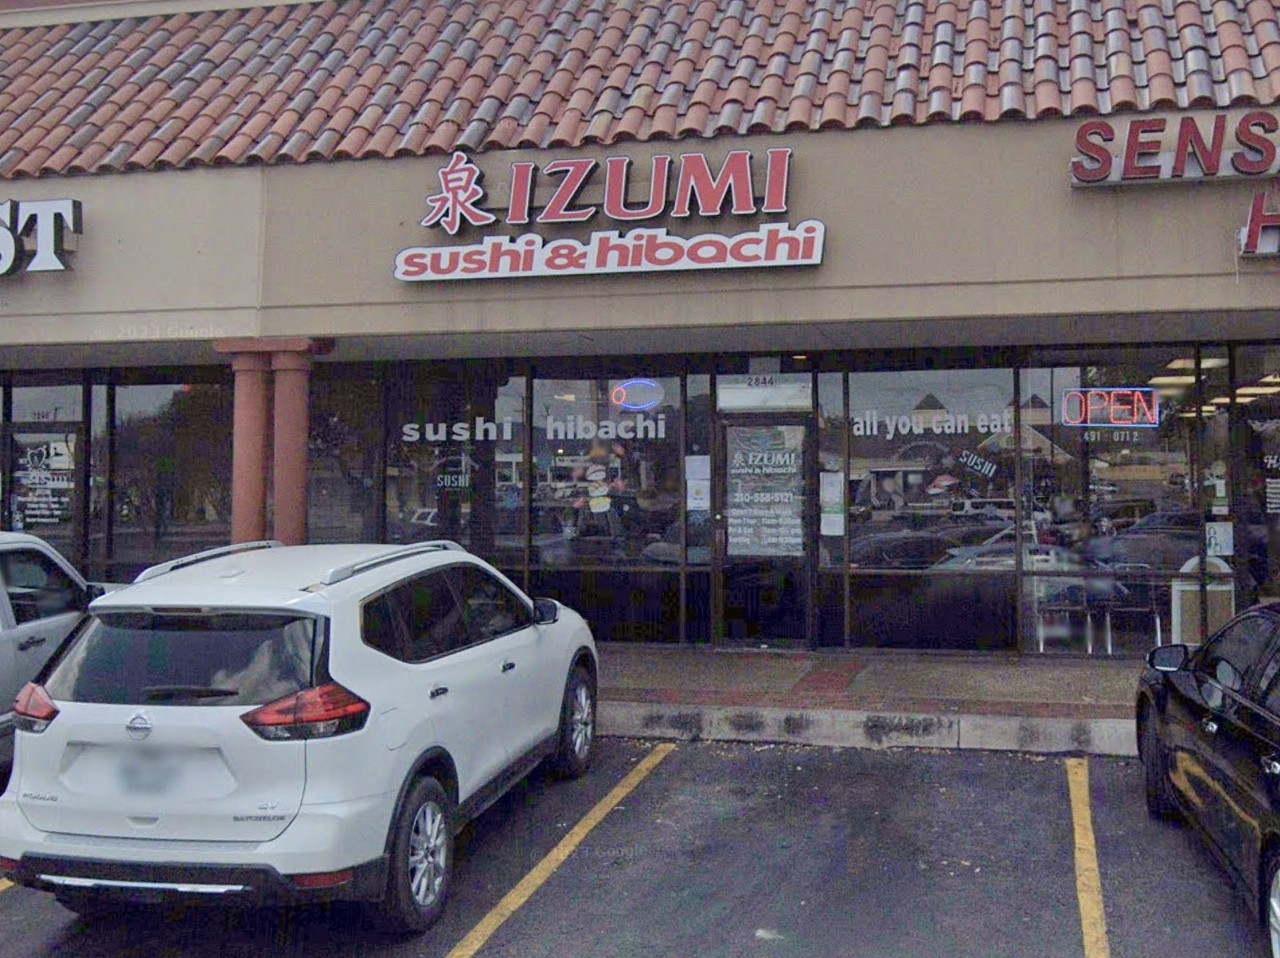 Izumi Sushi & Hibachi
Multiple Locations, (210) 538-5121, izumiallyoucaneat.com
This all-you-can-eat sushi spot also features hibachi, tempura and teriyaki dishes on its extensive menu. In 2023, Izumi debuted a new location in Schertz.